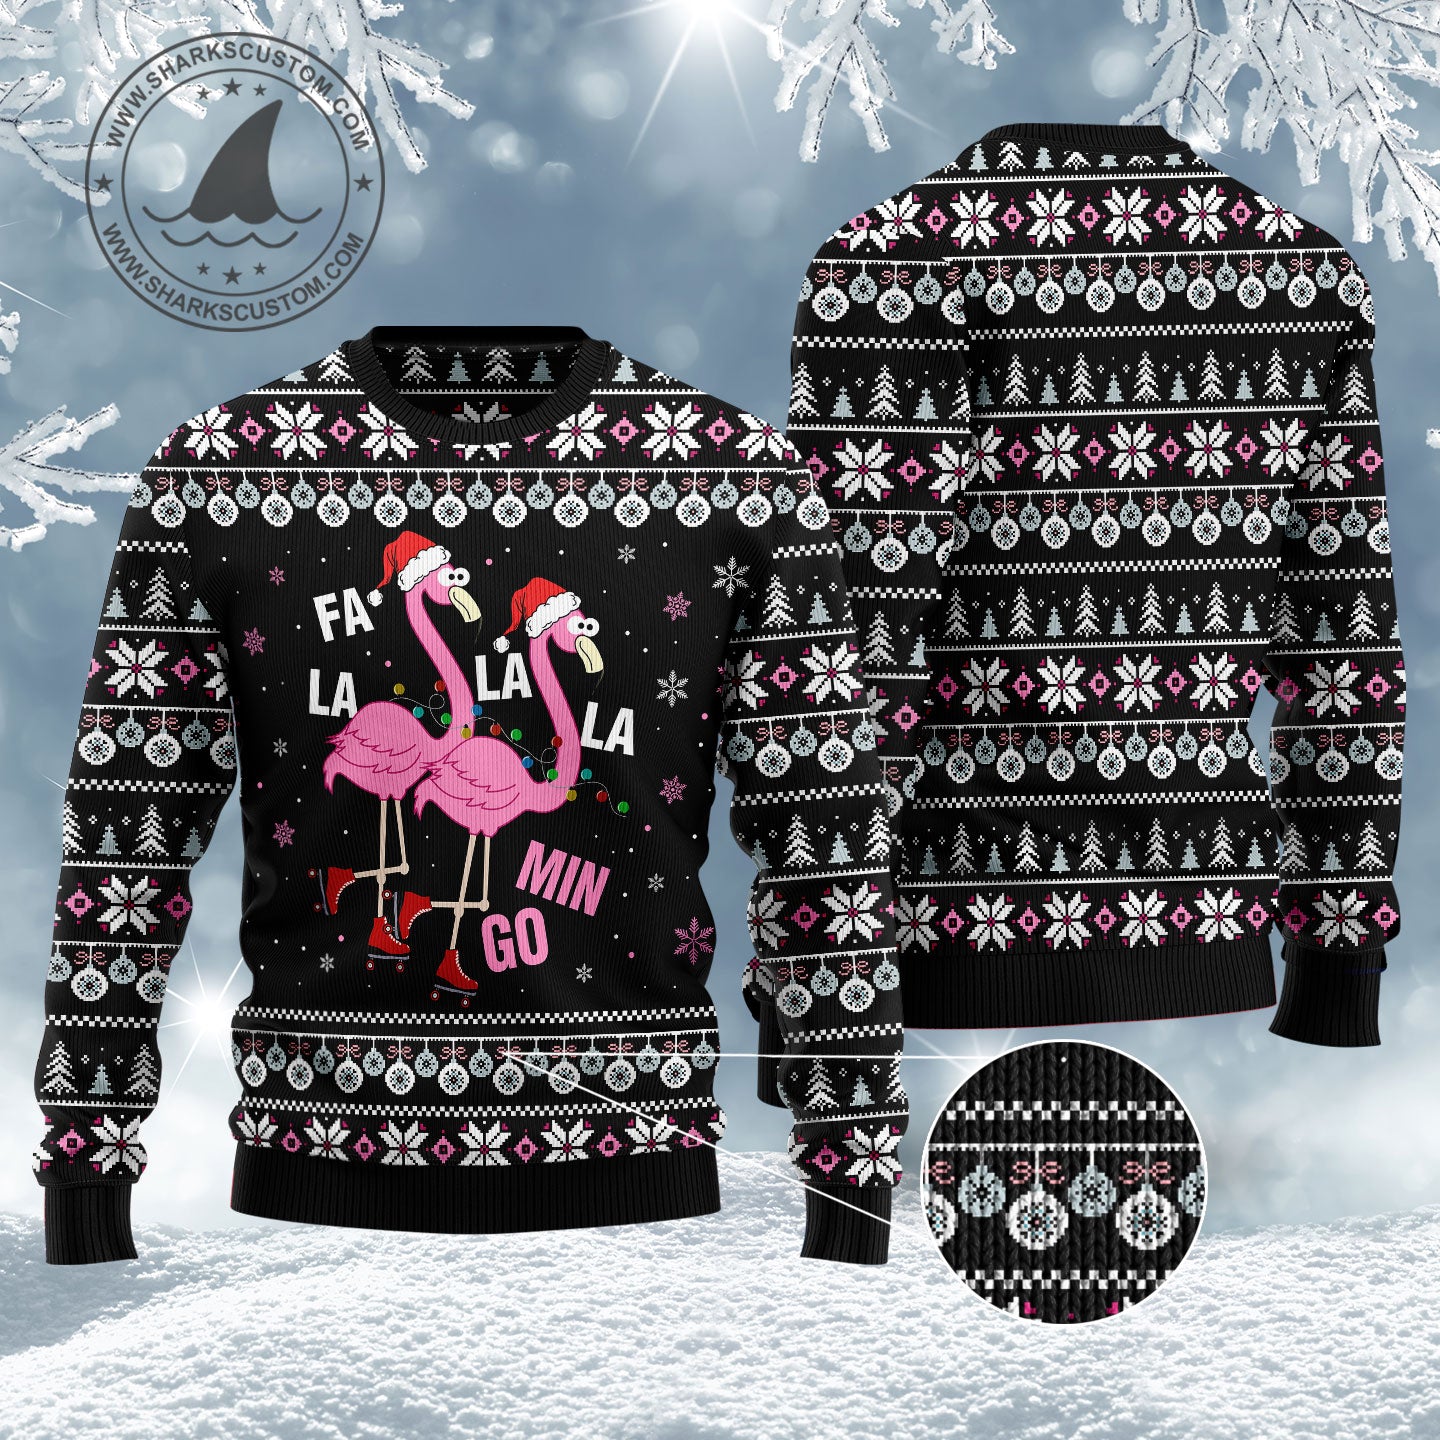 Fla la la lamingo Cute Flamingo HZ120801 unisex womens & mens, couples matching, friends, funny family ugly christmas holiday sweater gifts (plus size available)